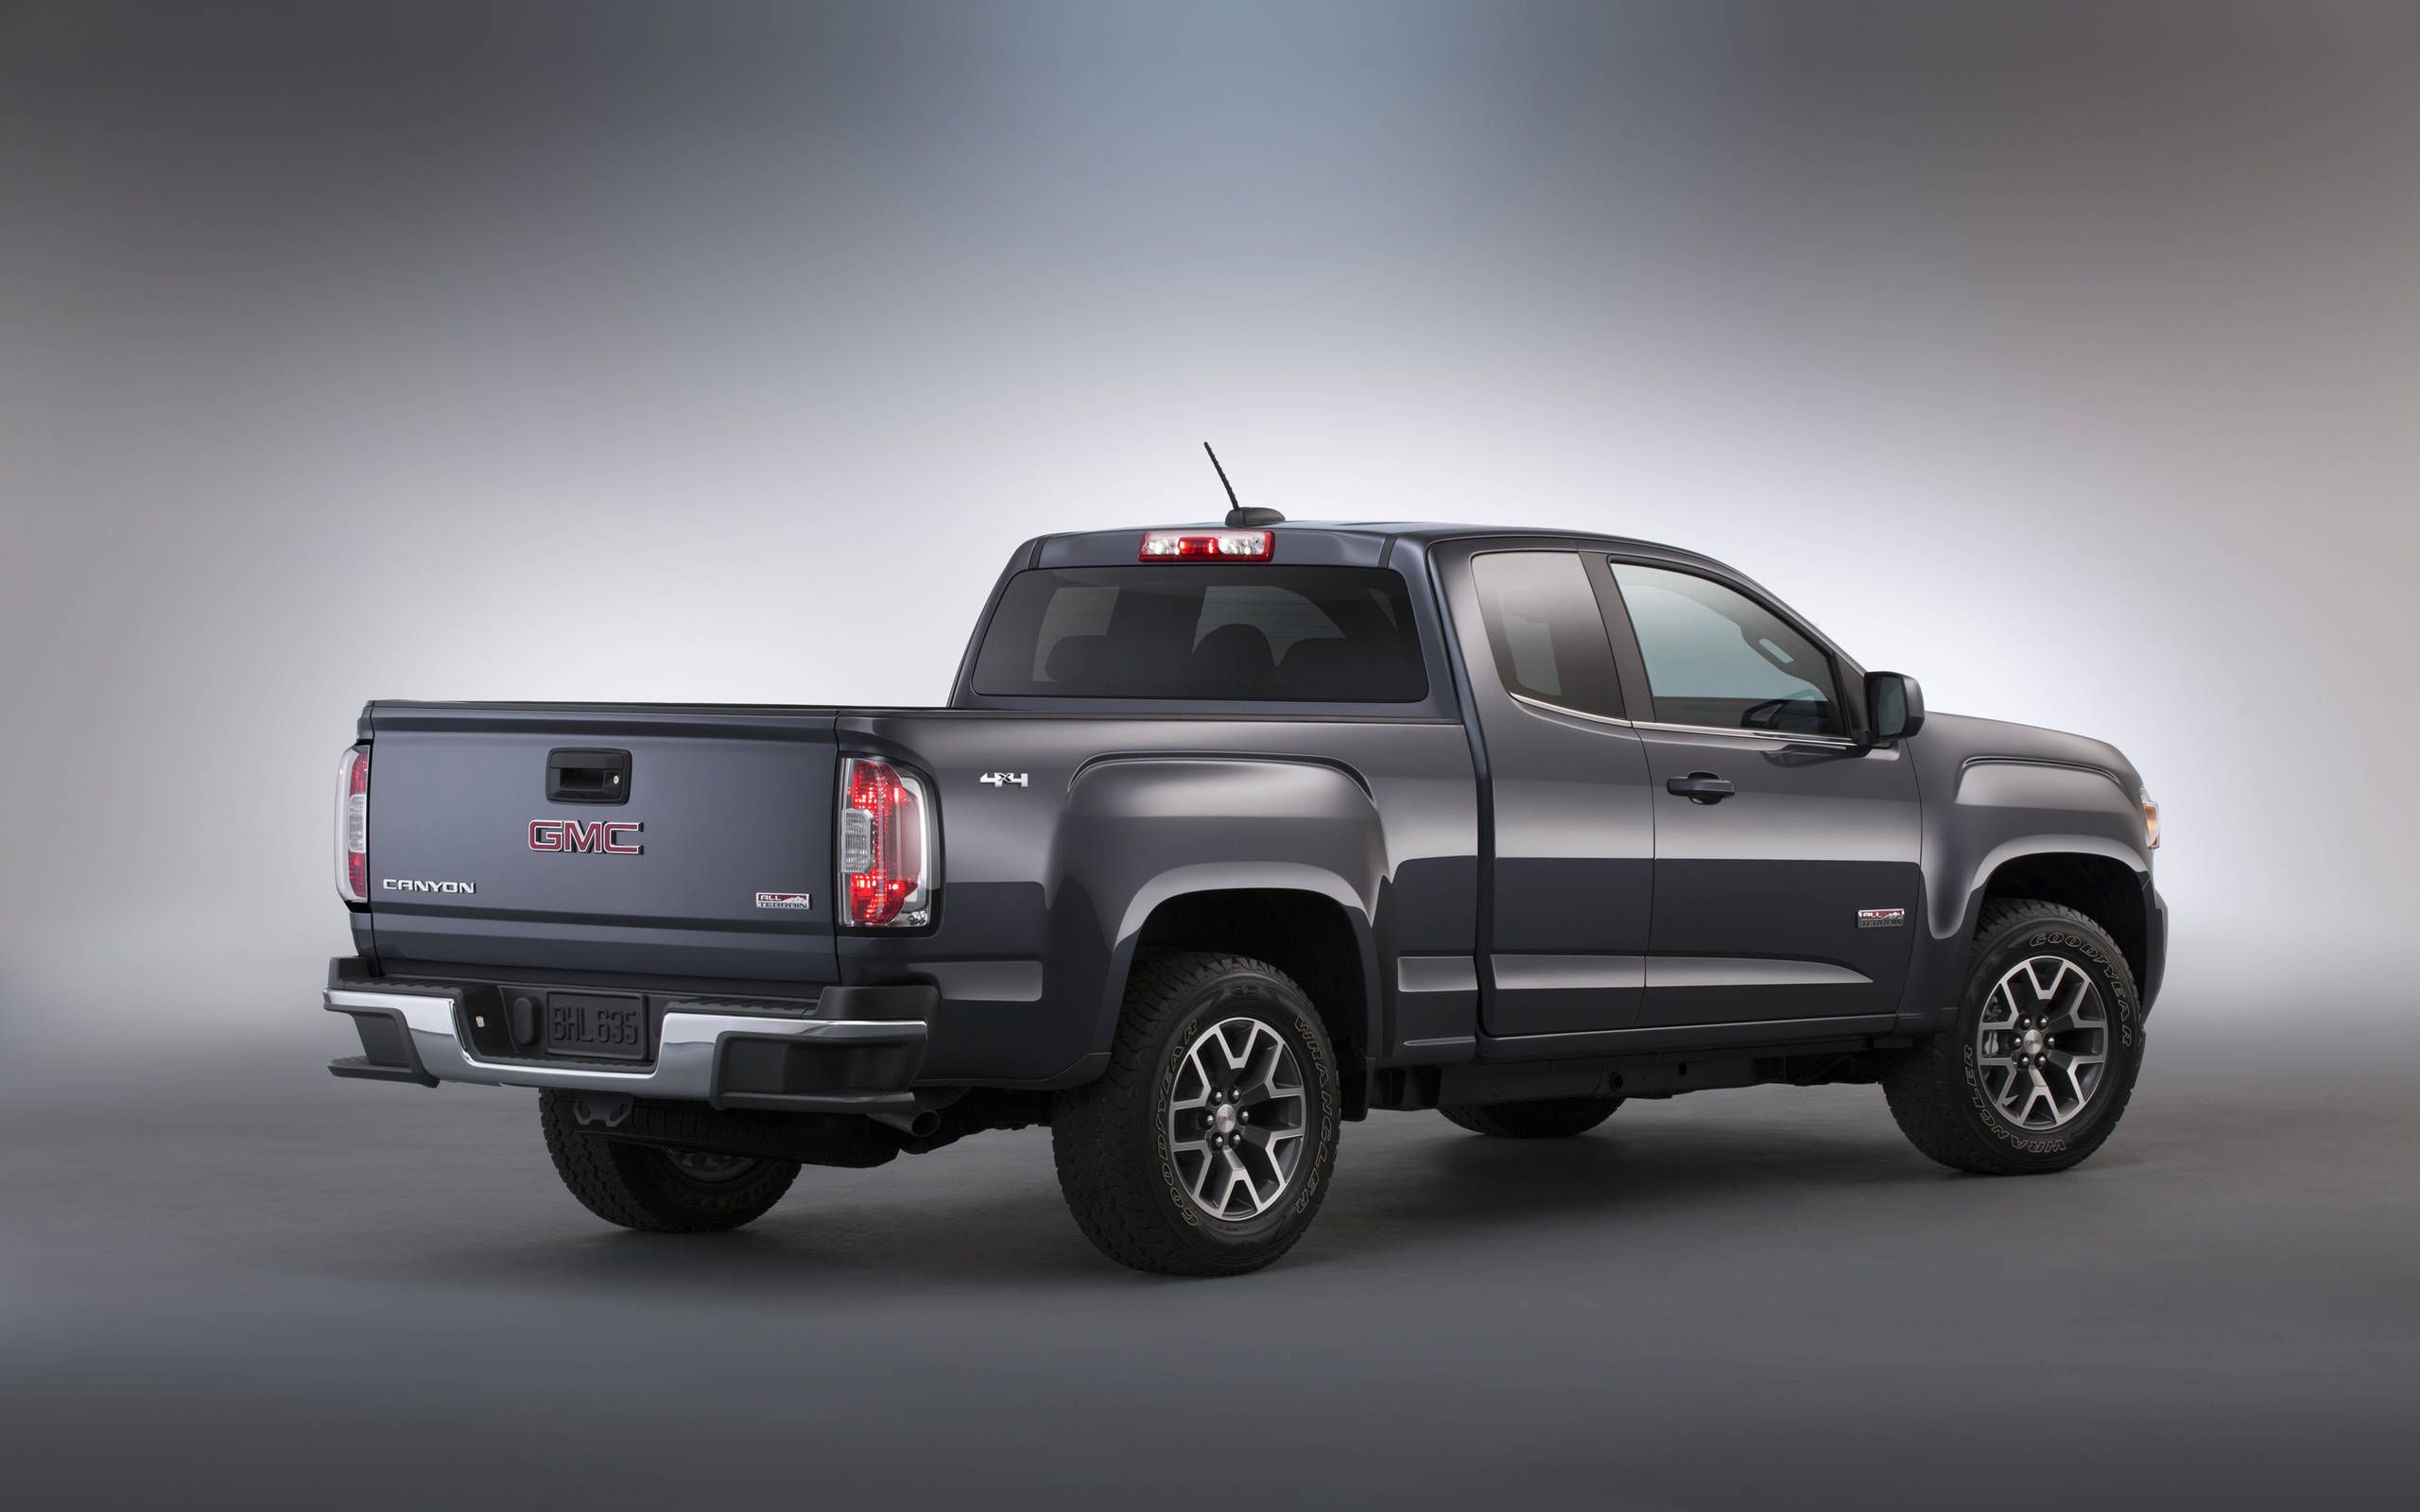 2015 GMC Canyon Extended Cab review notes